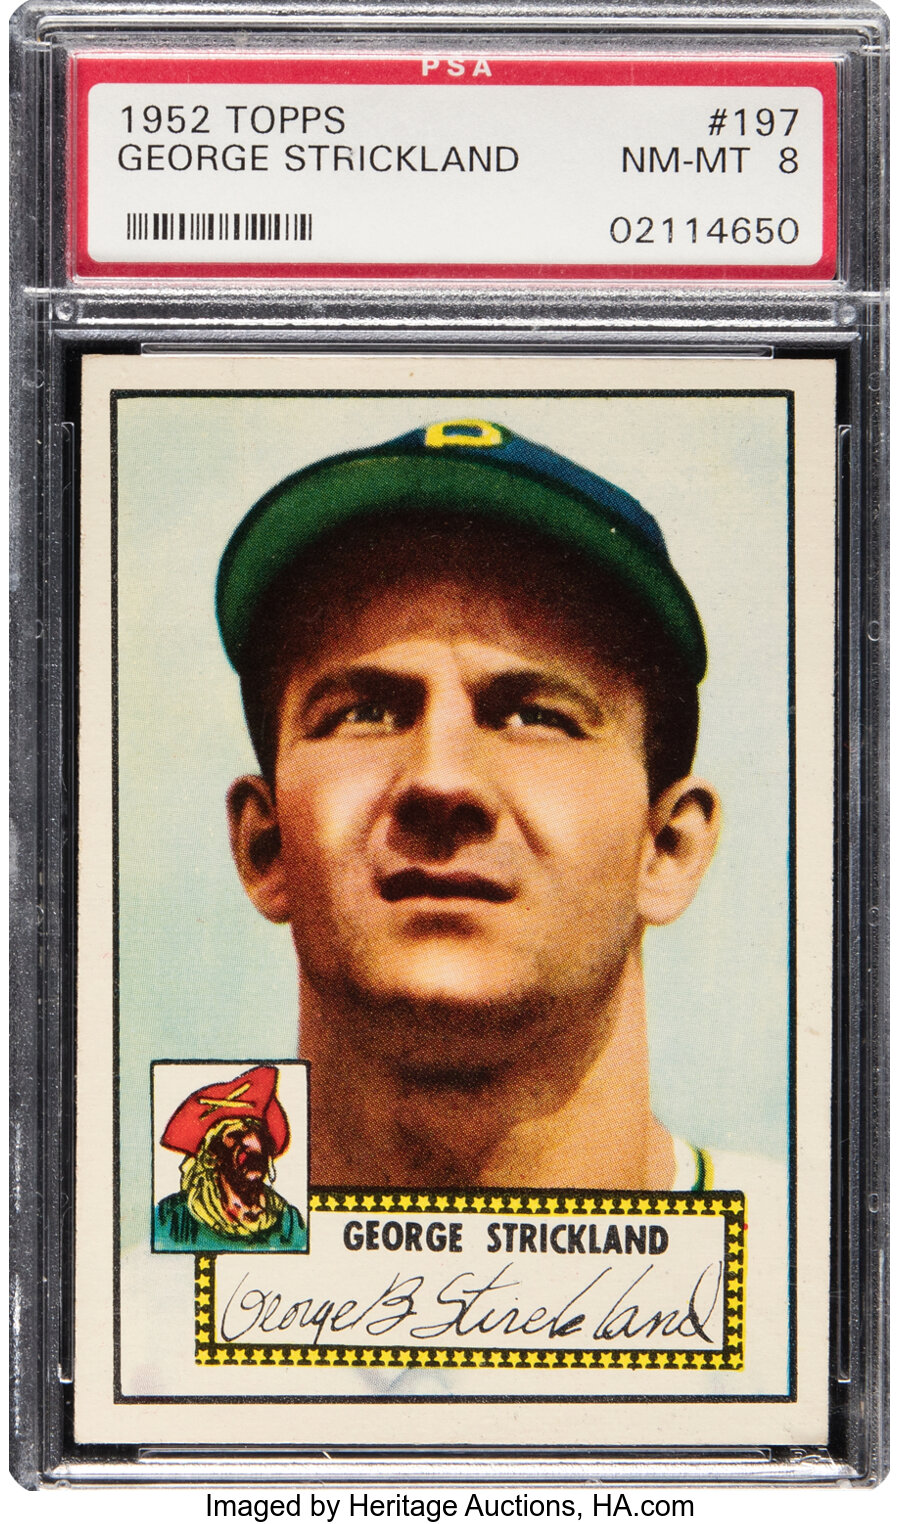 1952 Topps George Strickland Rookie #197 PSA NM-MT 8